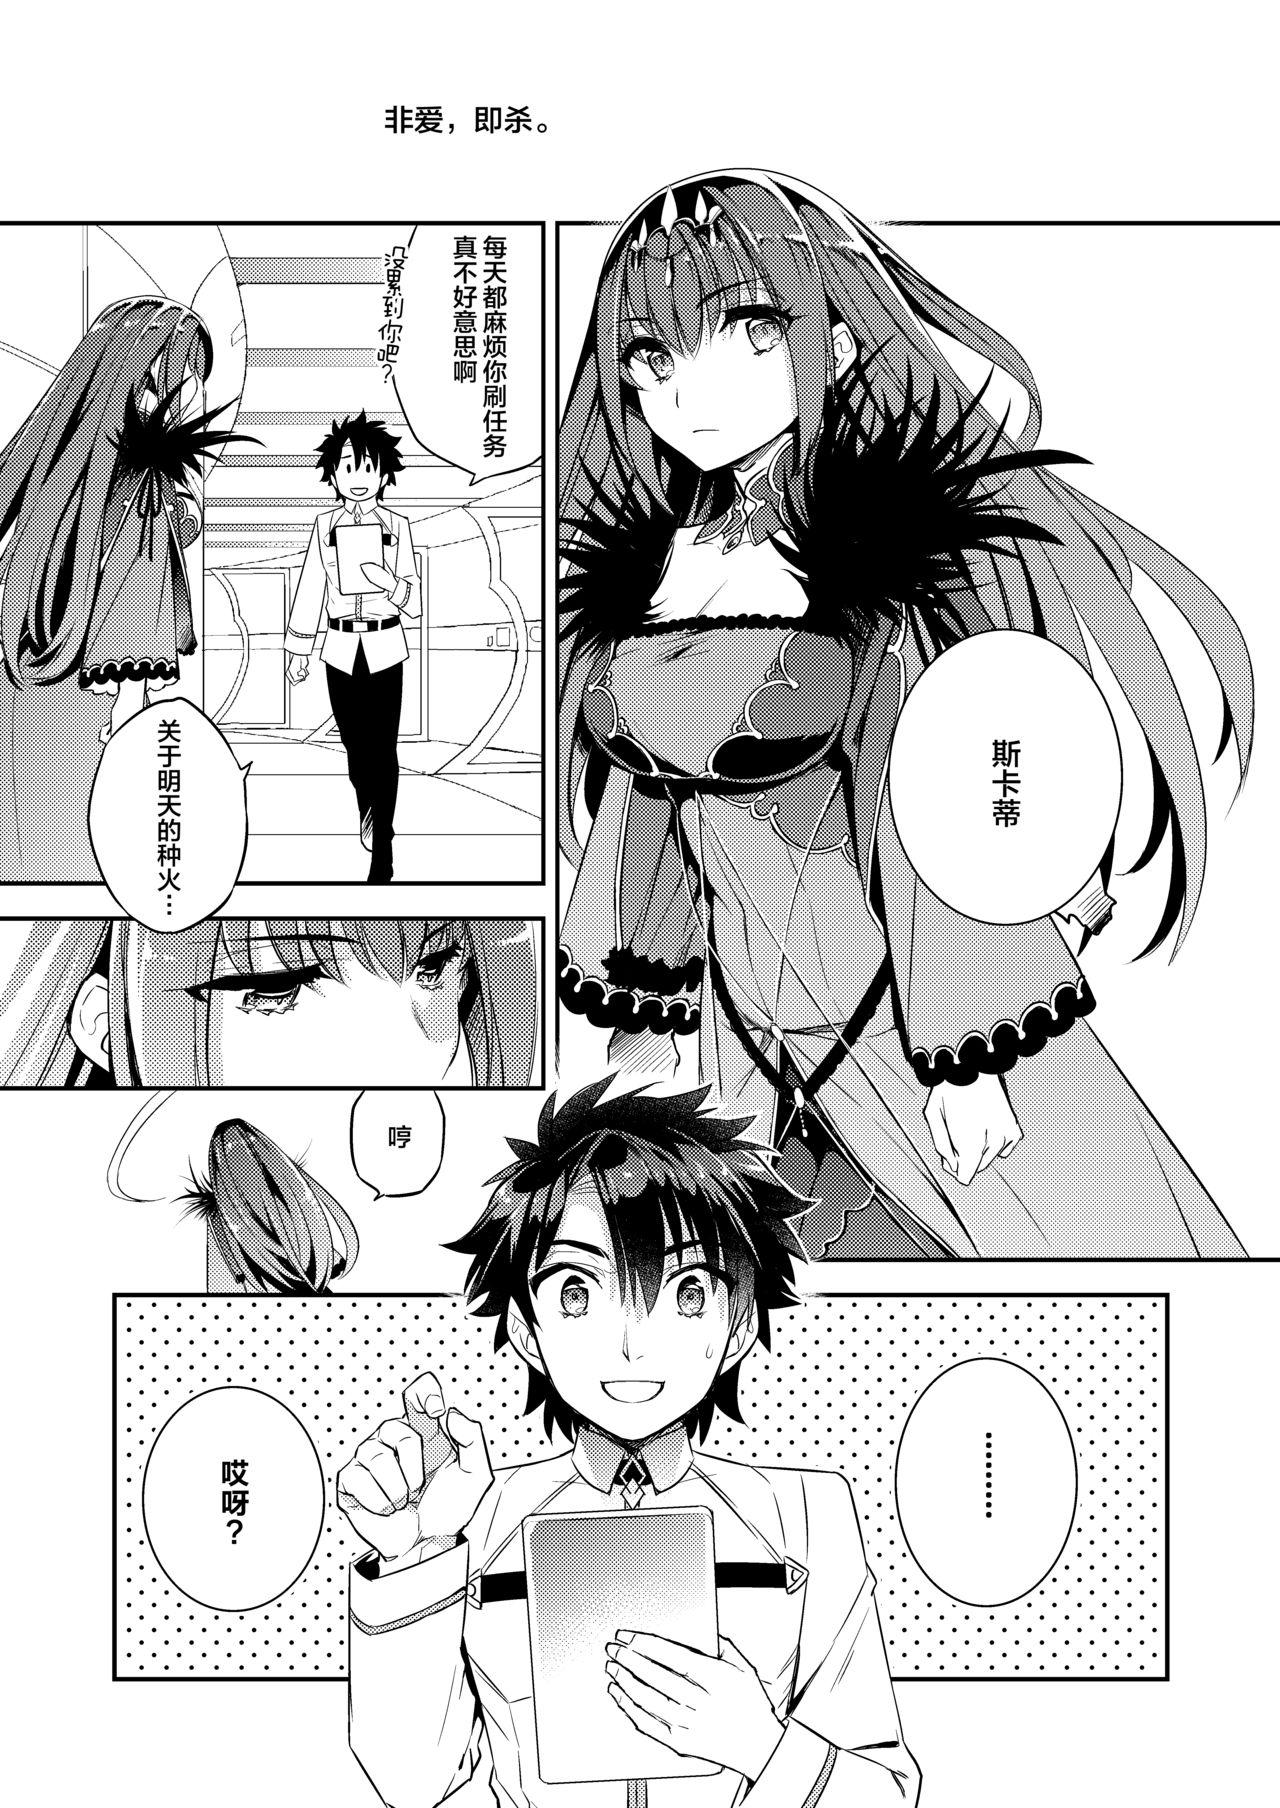 Balls C9-39 W Scathach to - Fate grand order Gay Bang - Page 3